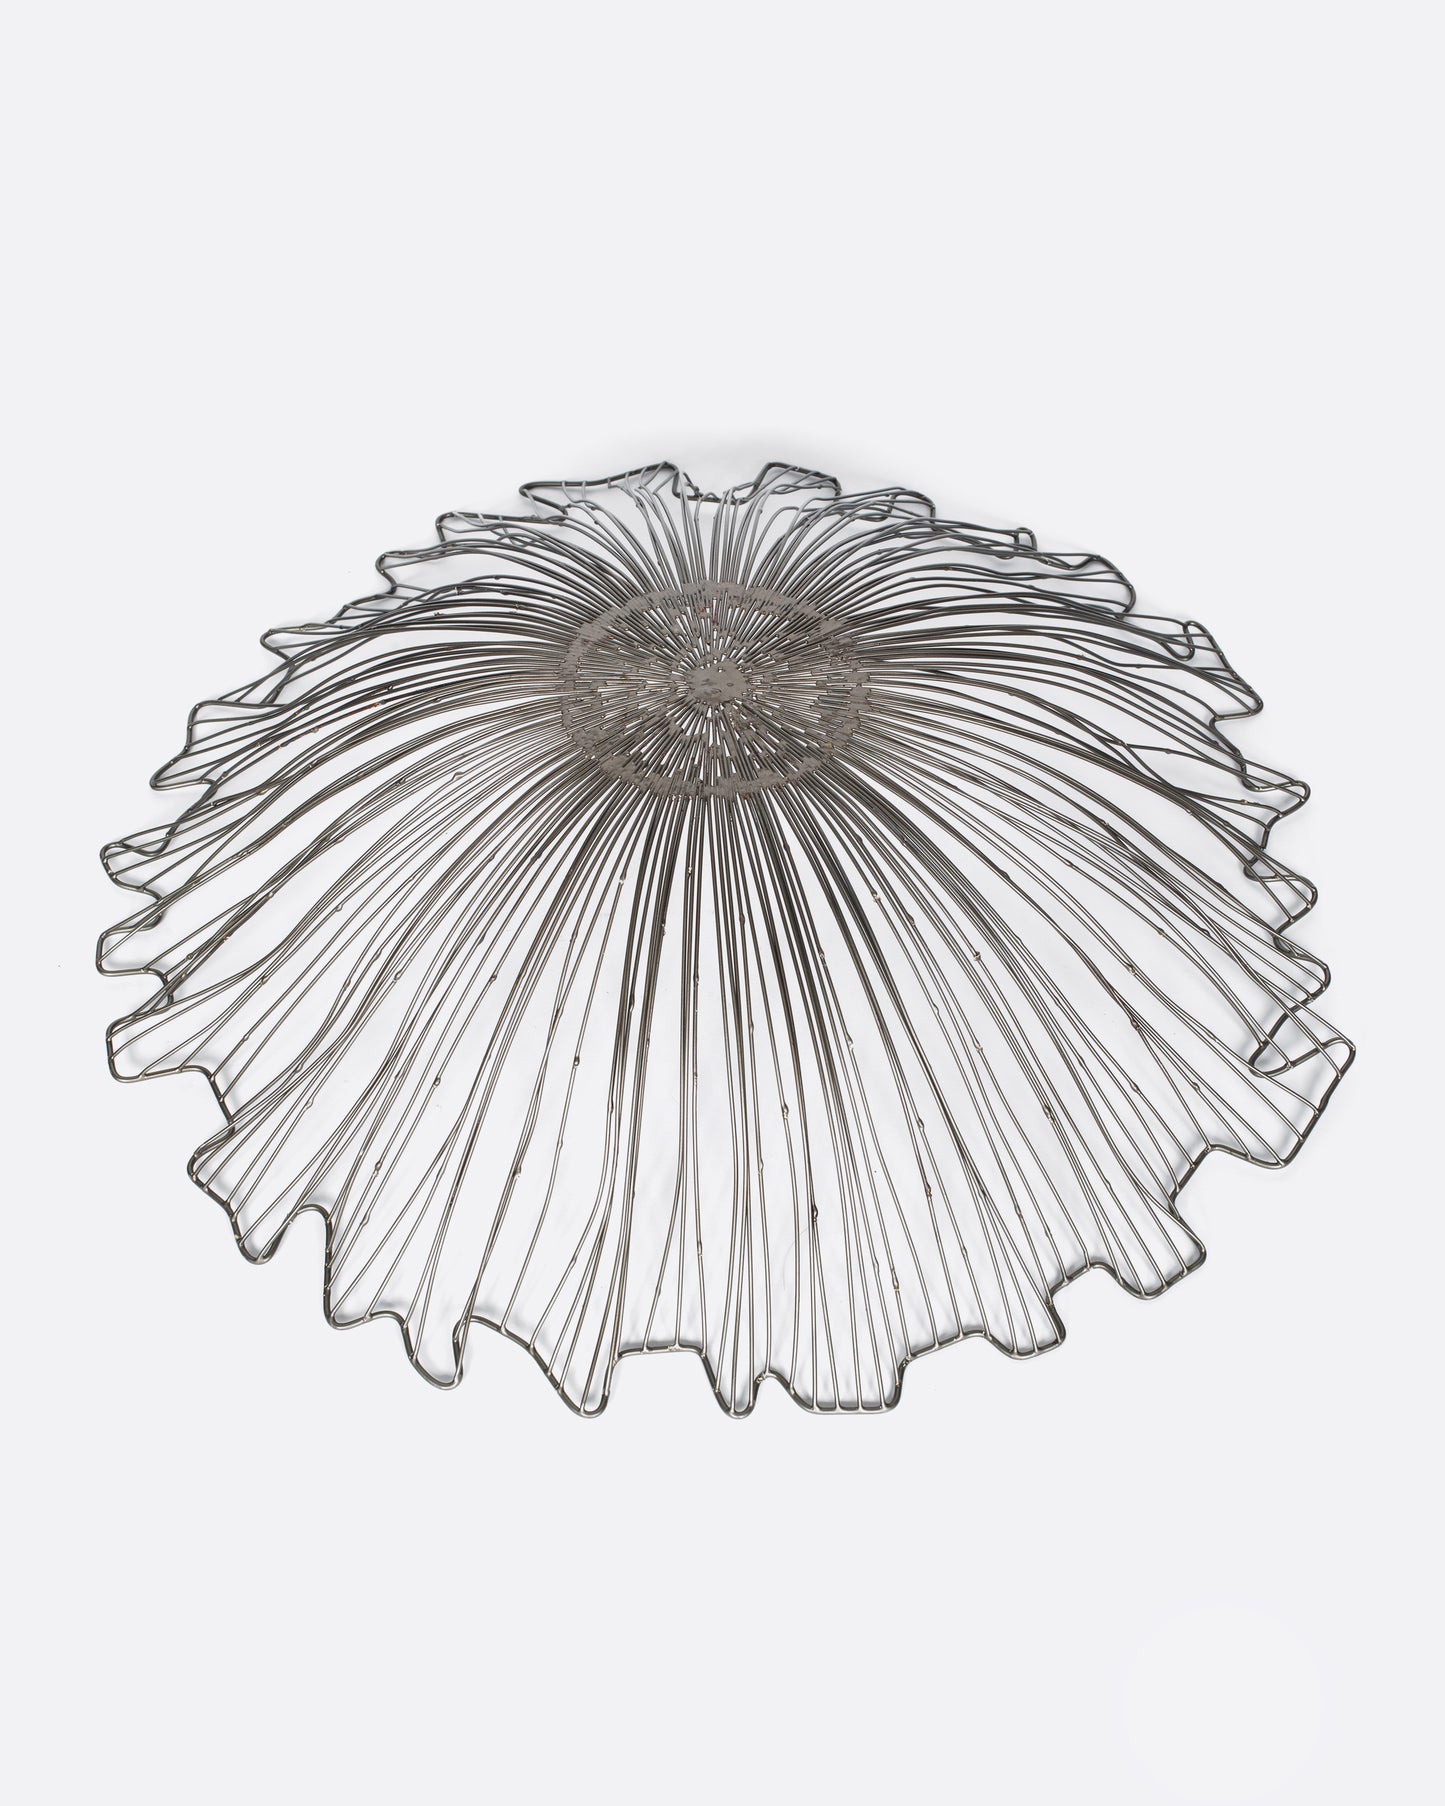 A wide, rippled wire bowl that's the perfect centerpiece for a kitchen island or dinner table.